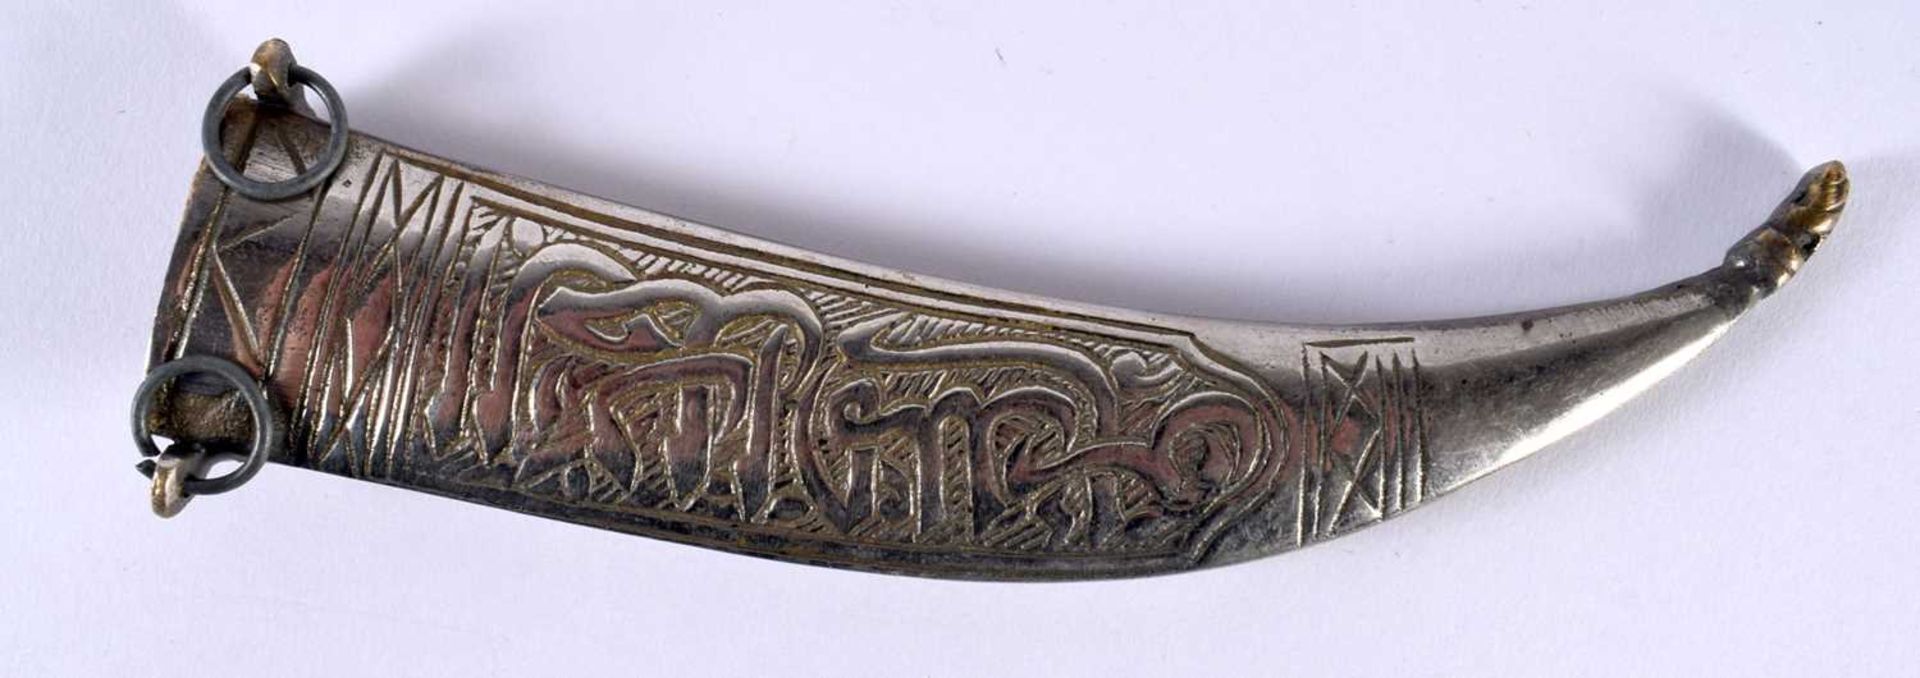 A Middle Eastern Dagger with calligraphic Inscription. 27 cm long. - Image 8 of 9